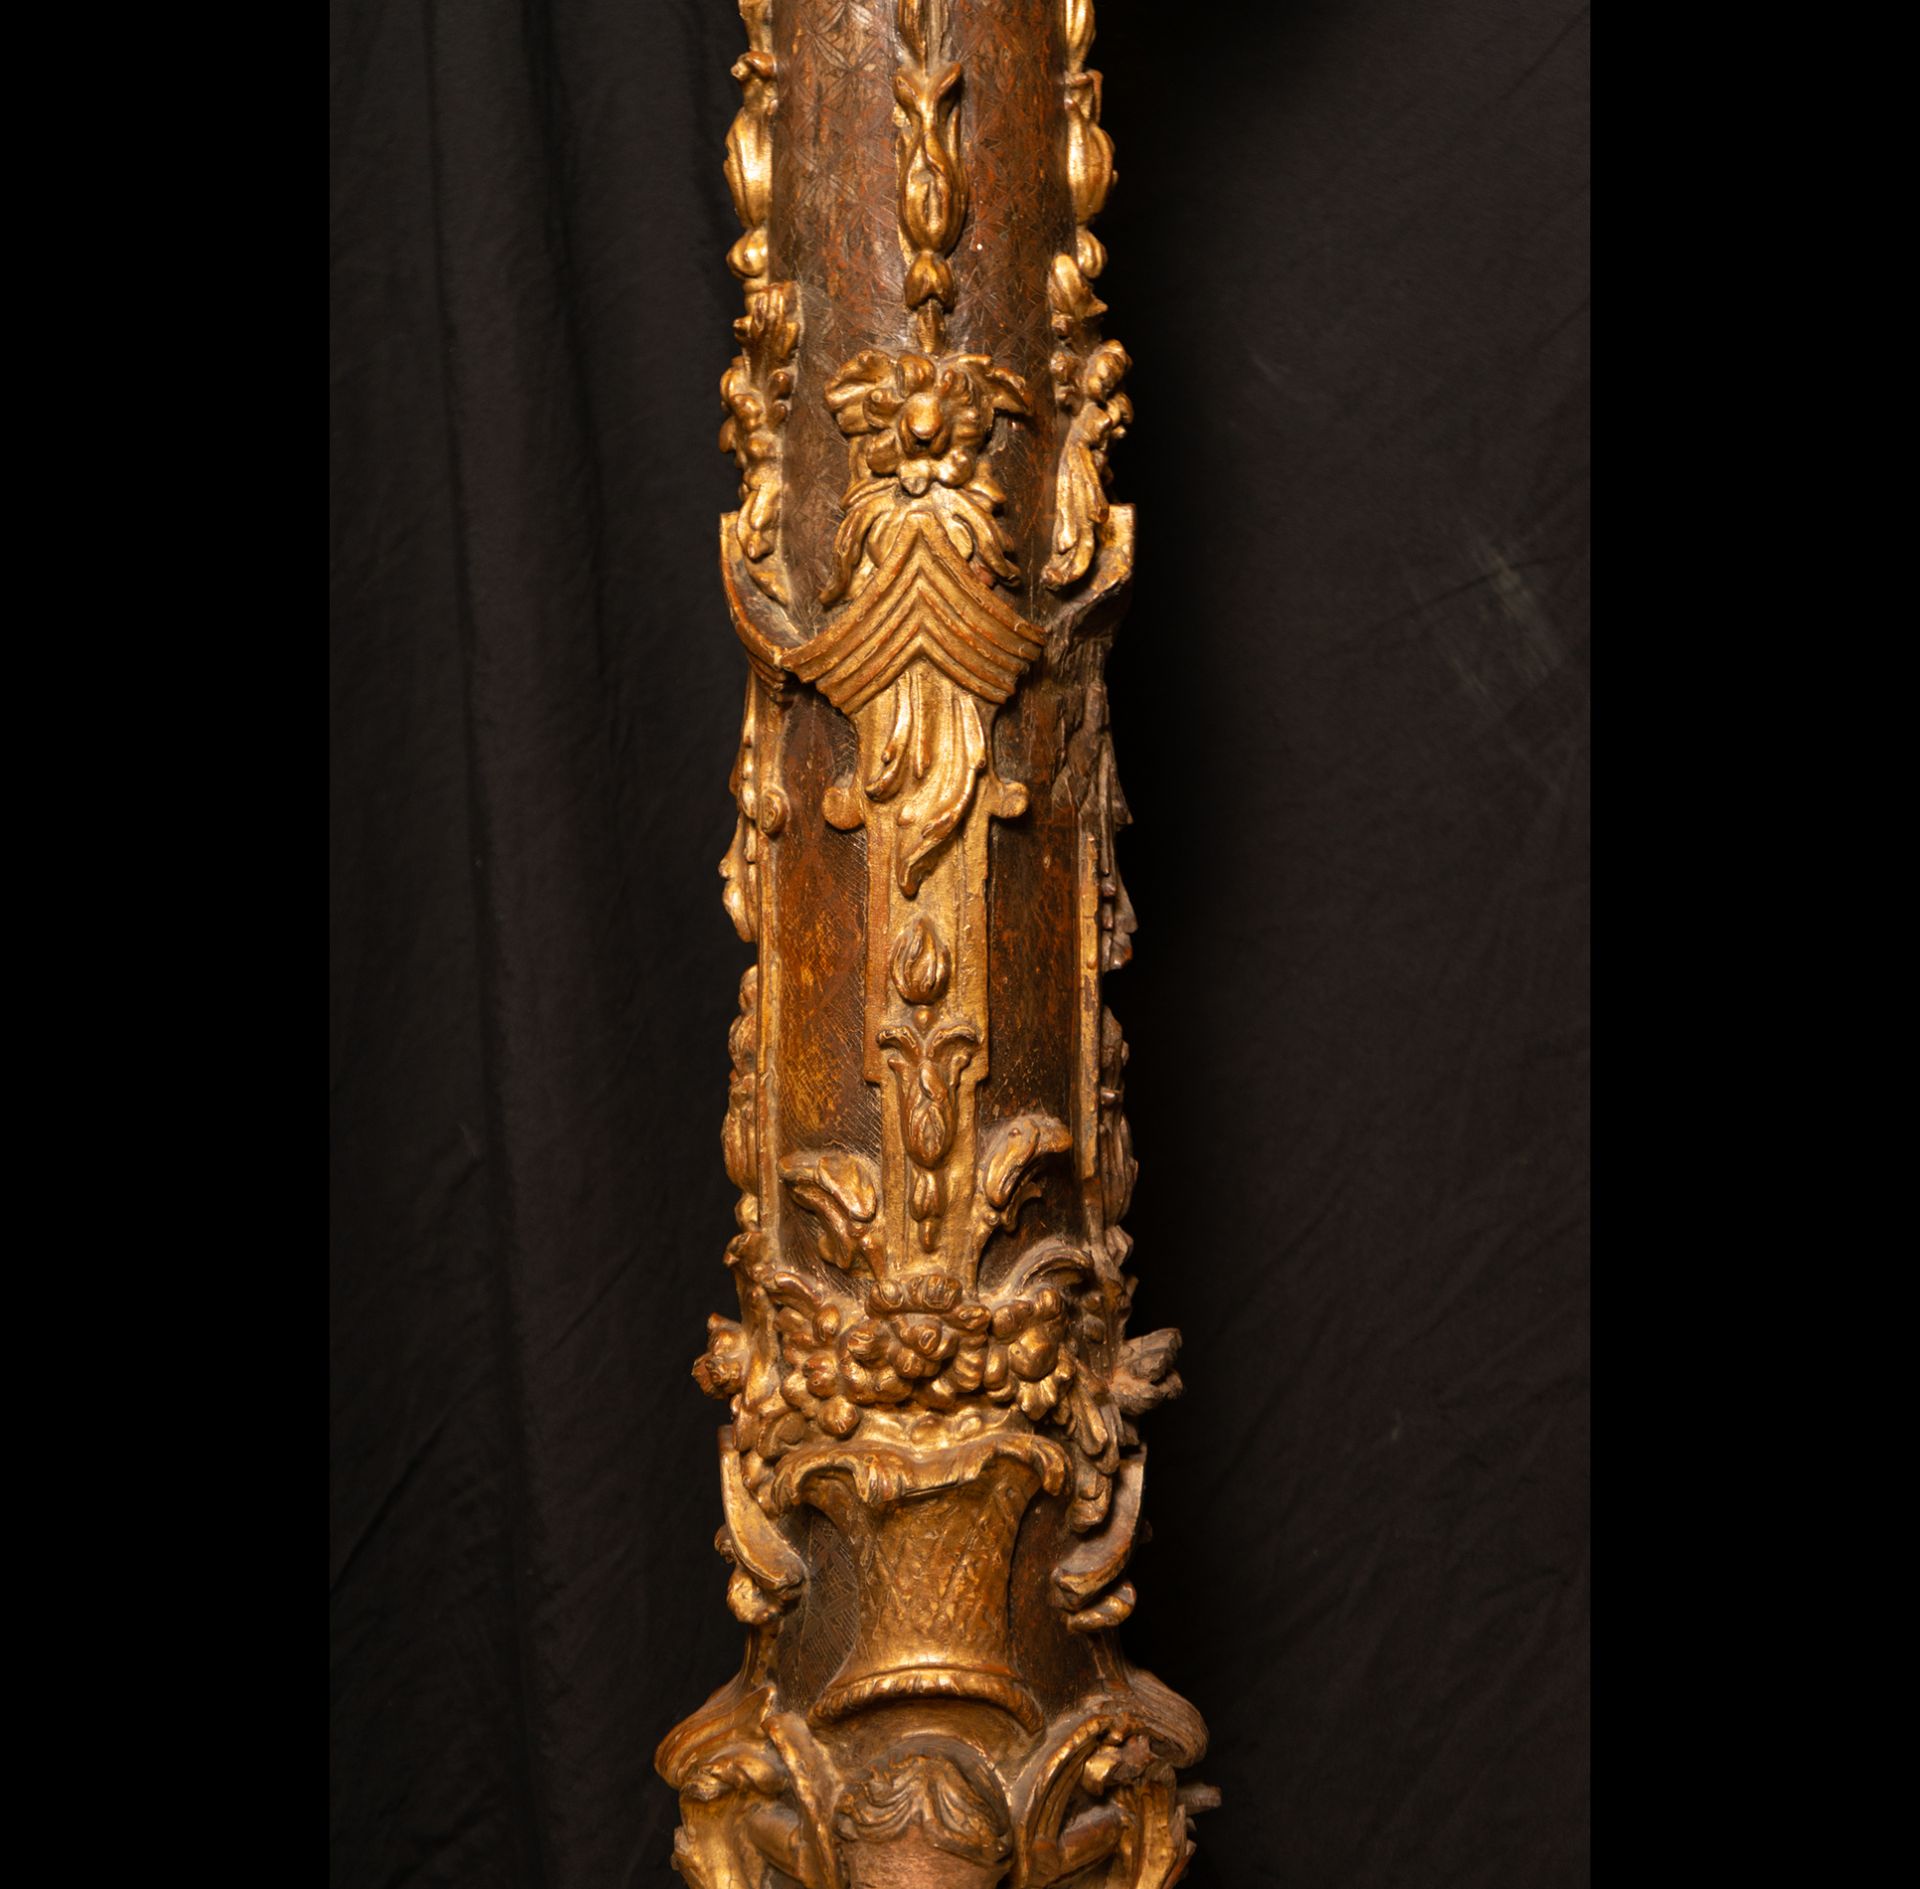 Important pair of Baroque Columns in gilded wood, Sevillian school of the 17th century - Image 12 of 16